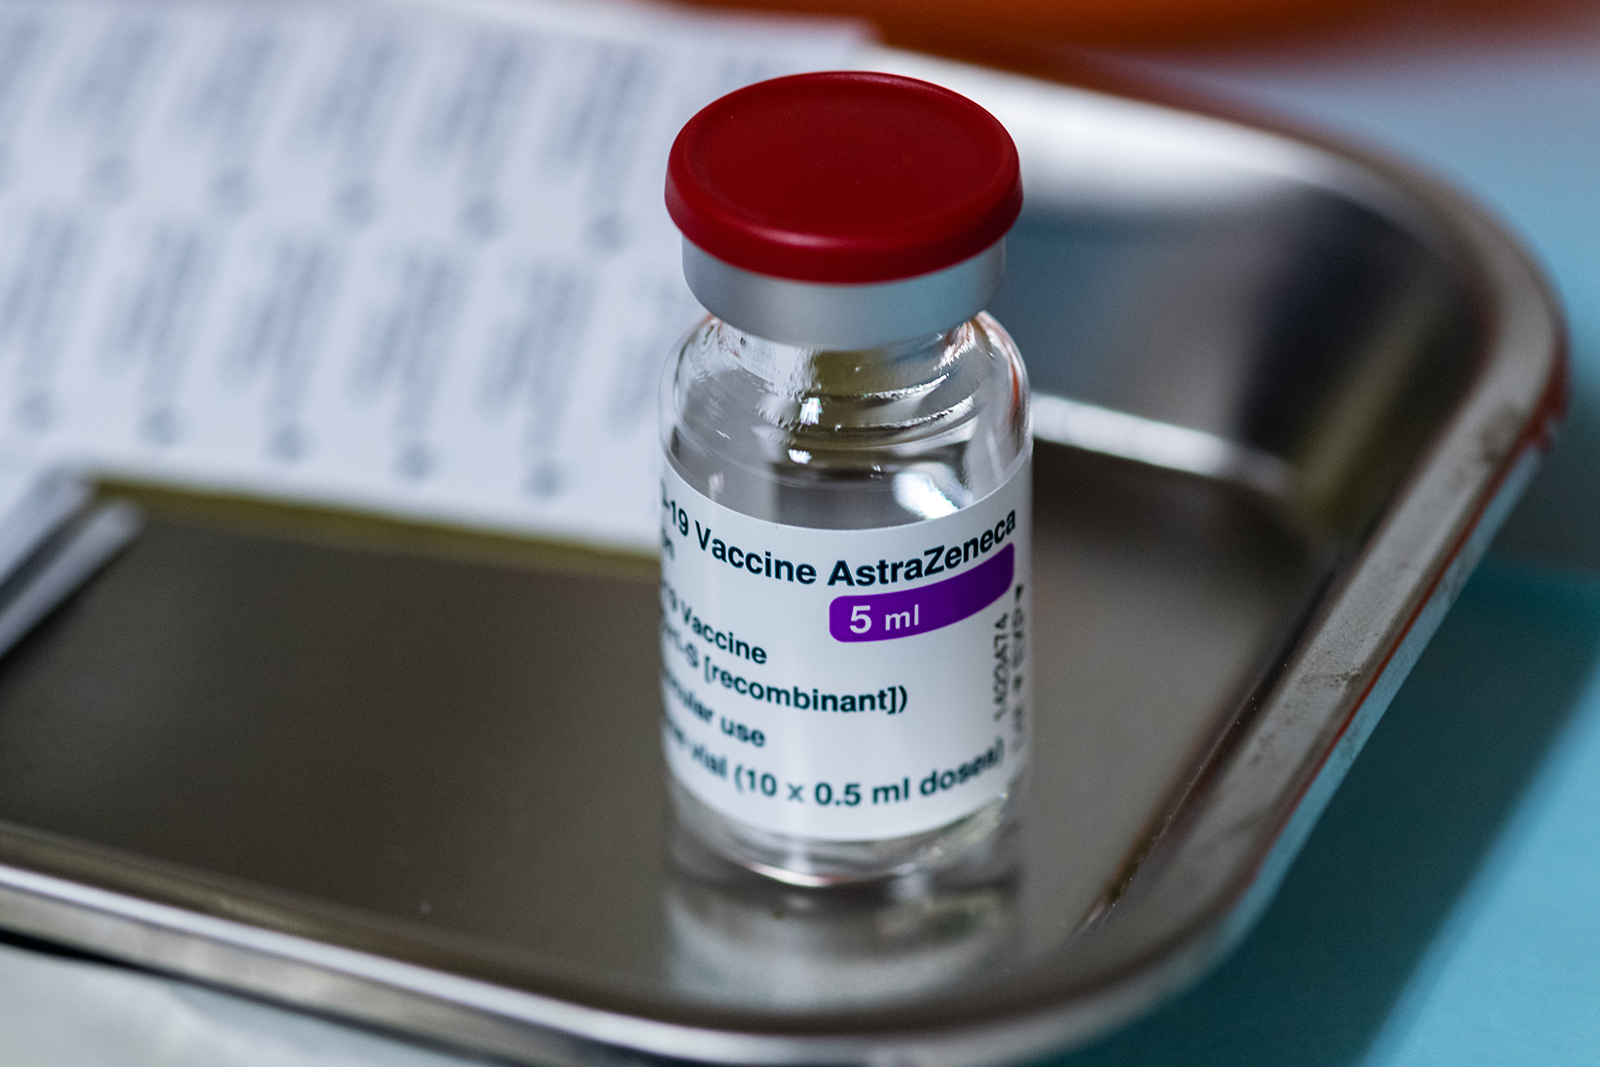 A vial of AstraZeneca Covid-19 vaccine is seen in Dippoldiswalde, Germany, on March 15.